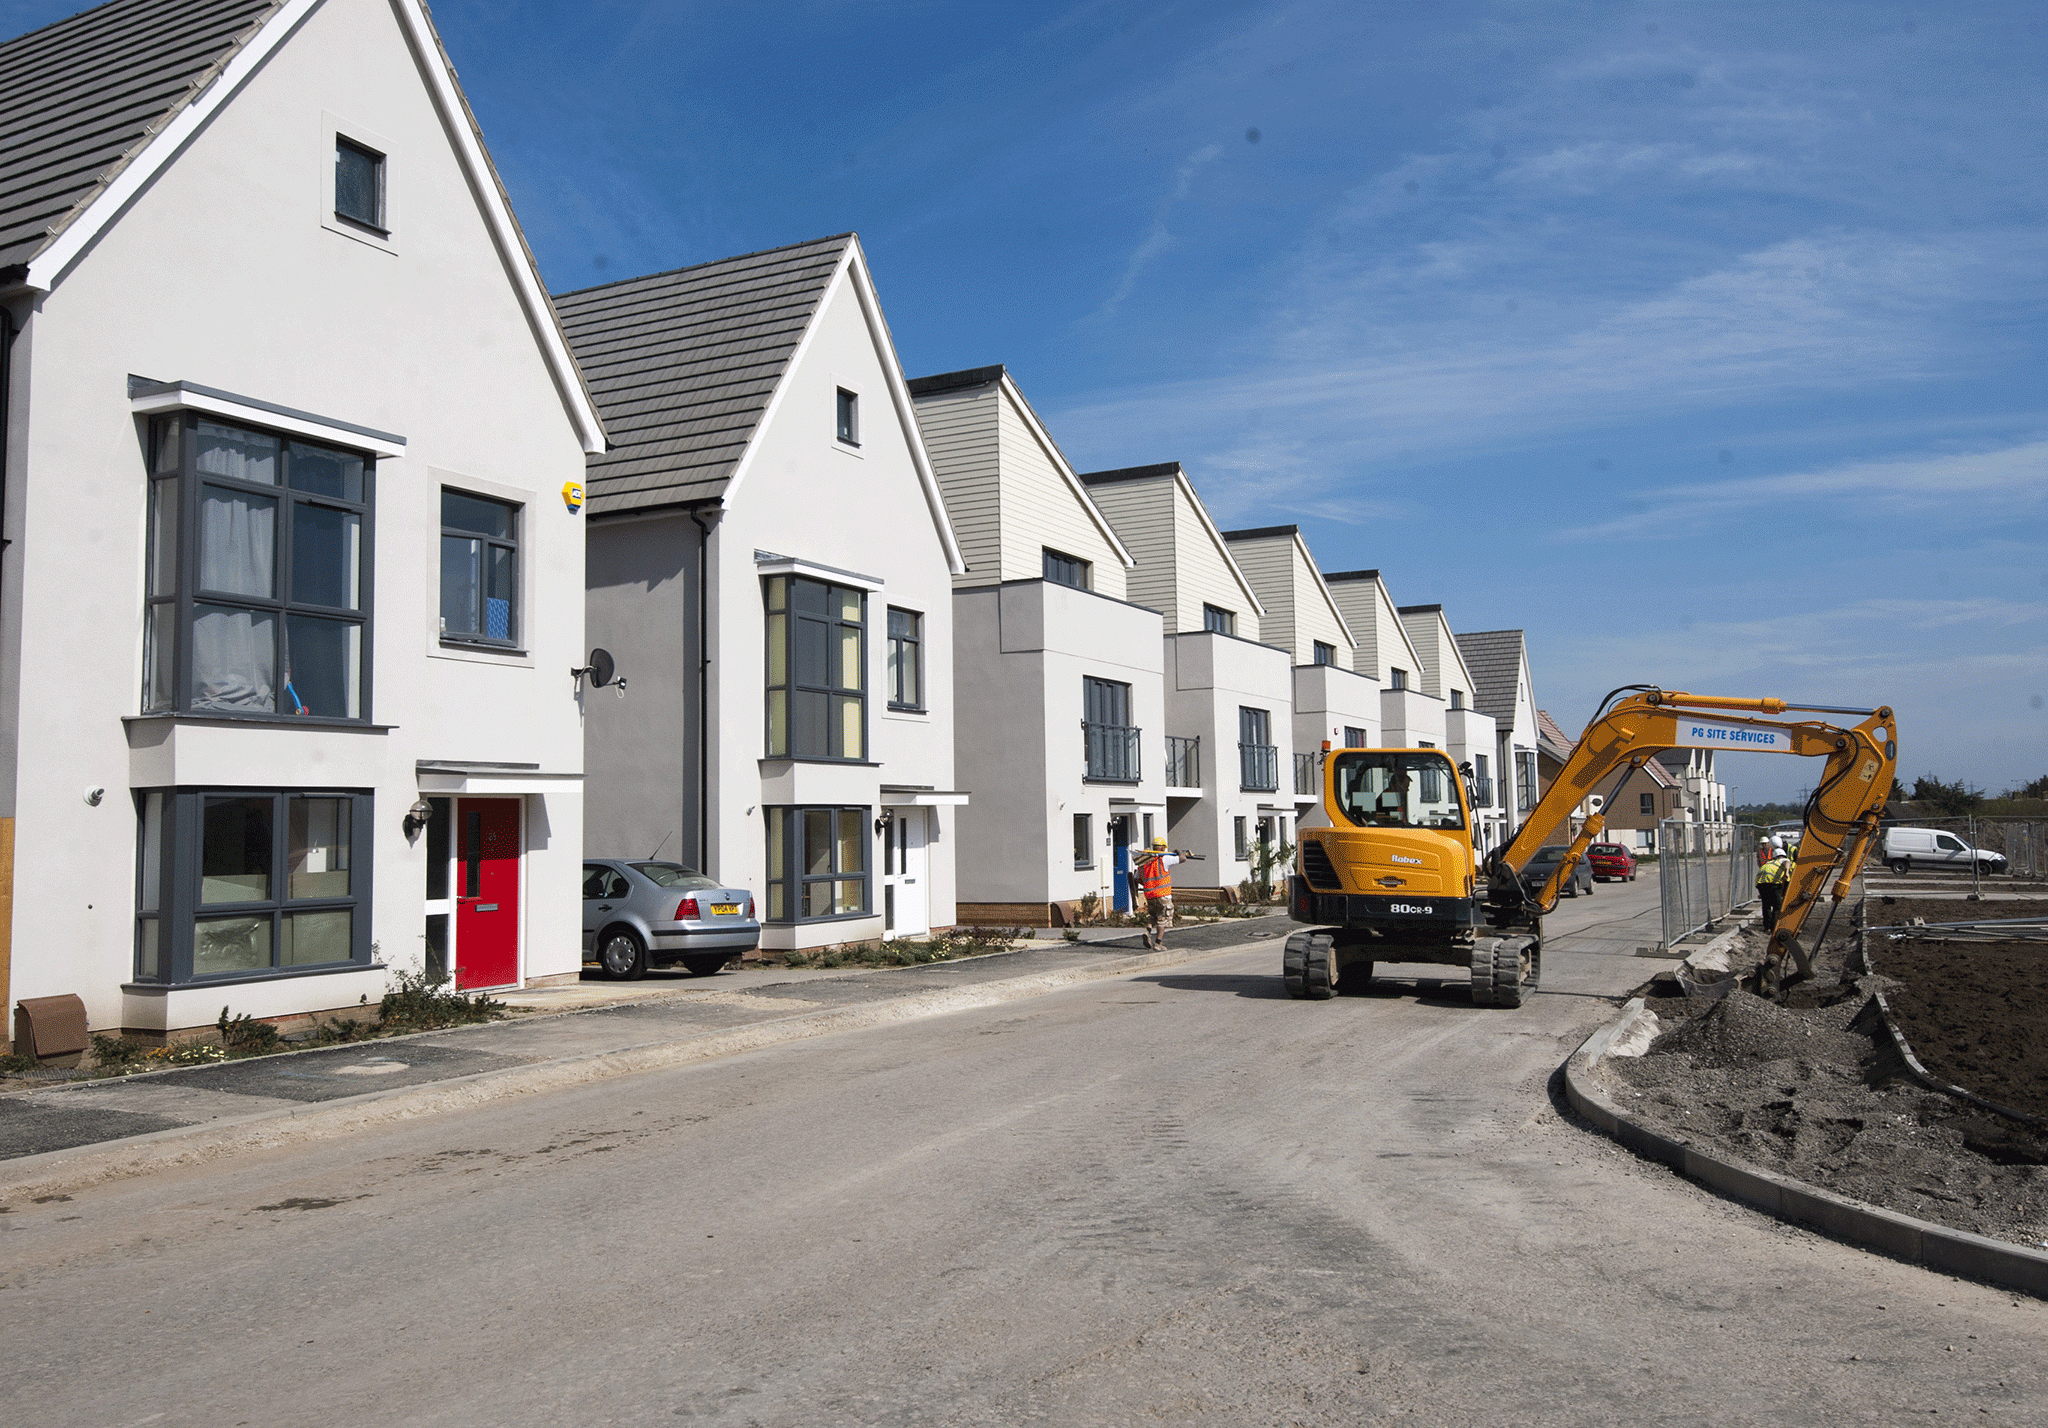 The company aims to  “support of the Government’s desire to increase housing supply across the UK”.